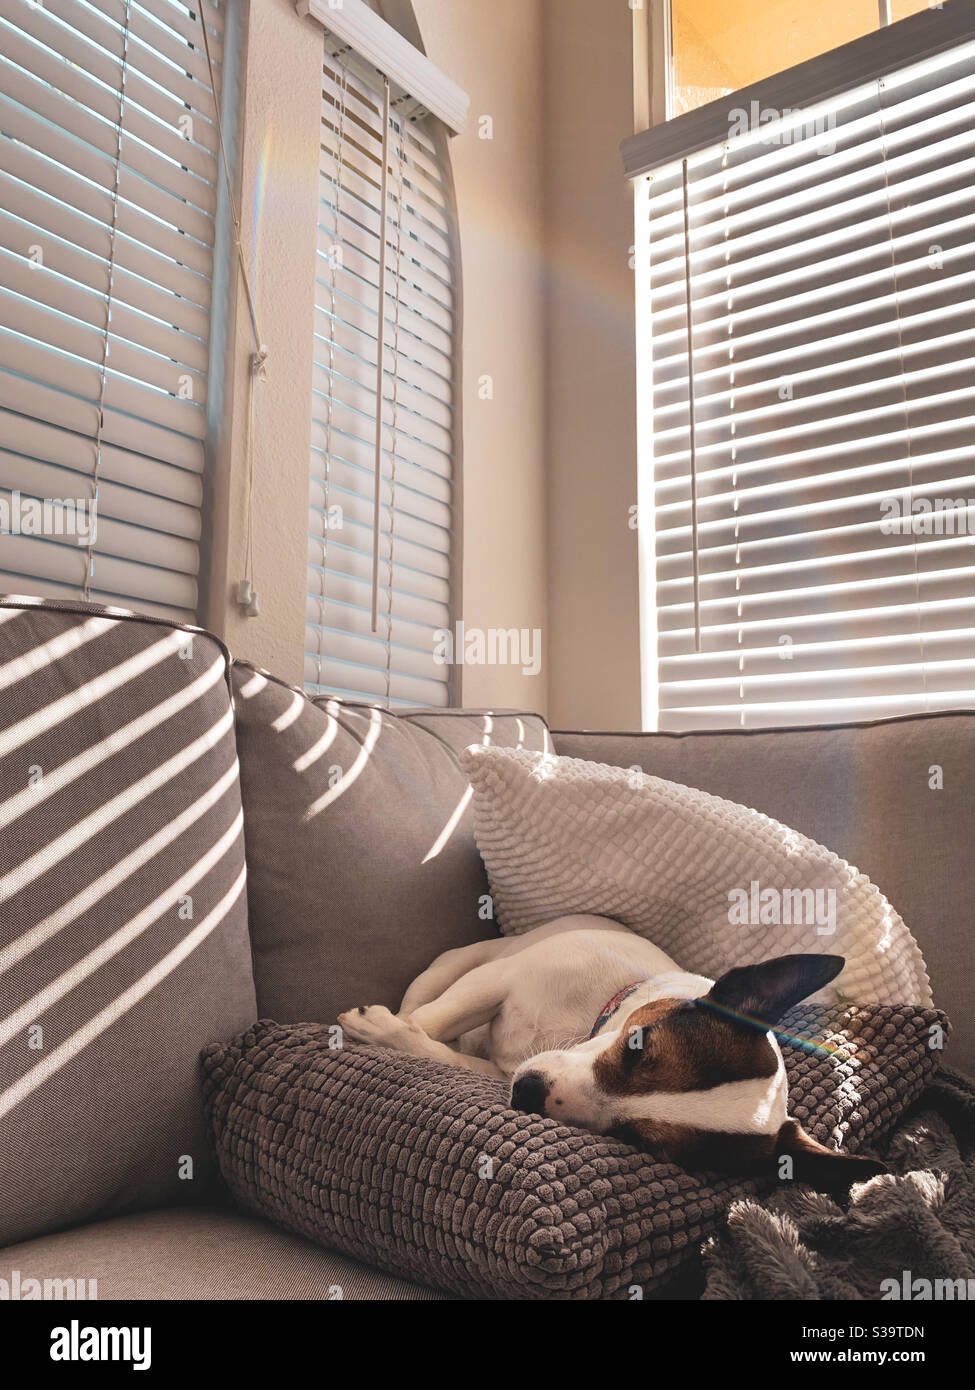 Sleepy Jack Russell Terrier dog napping on top of a pile of pillows on a sofa with sunlight streaming through window blinds. Stock Photo